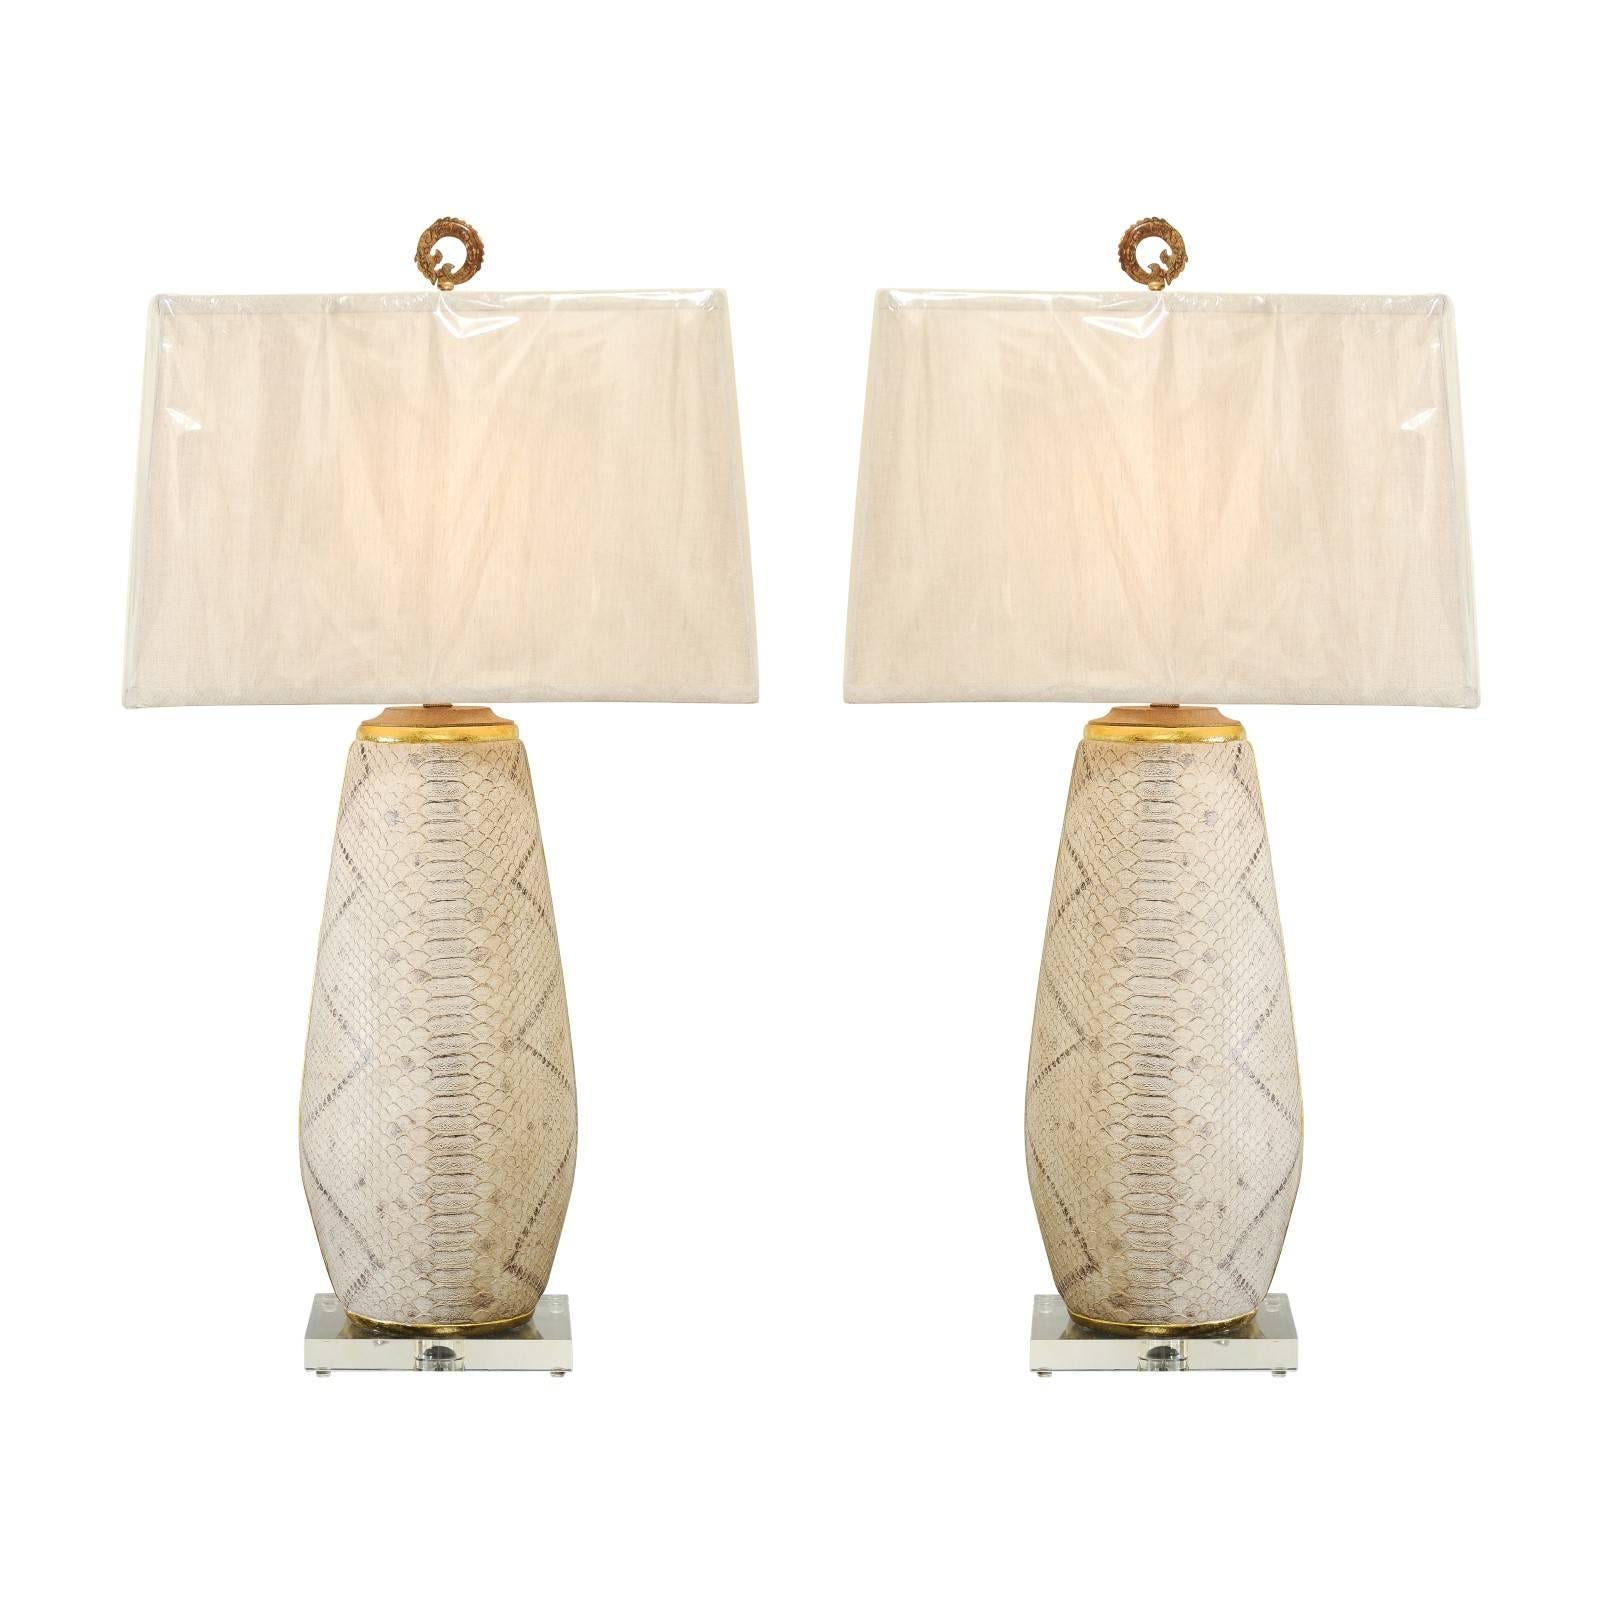 Outstanding Pair of Faux-Snakeskin Vessels and Custom Lamps For Sale